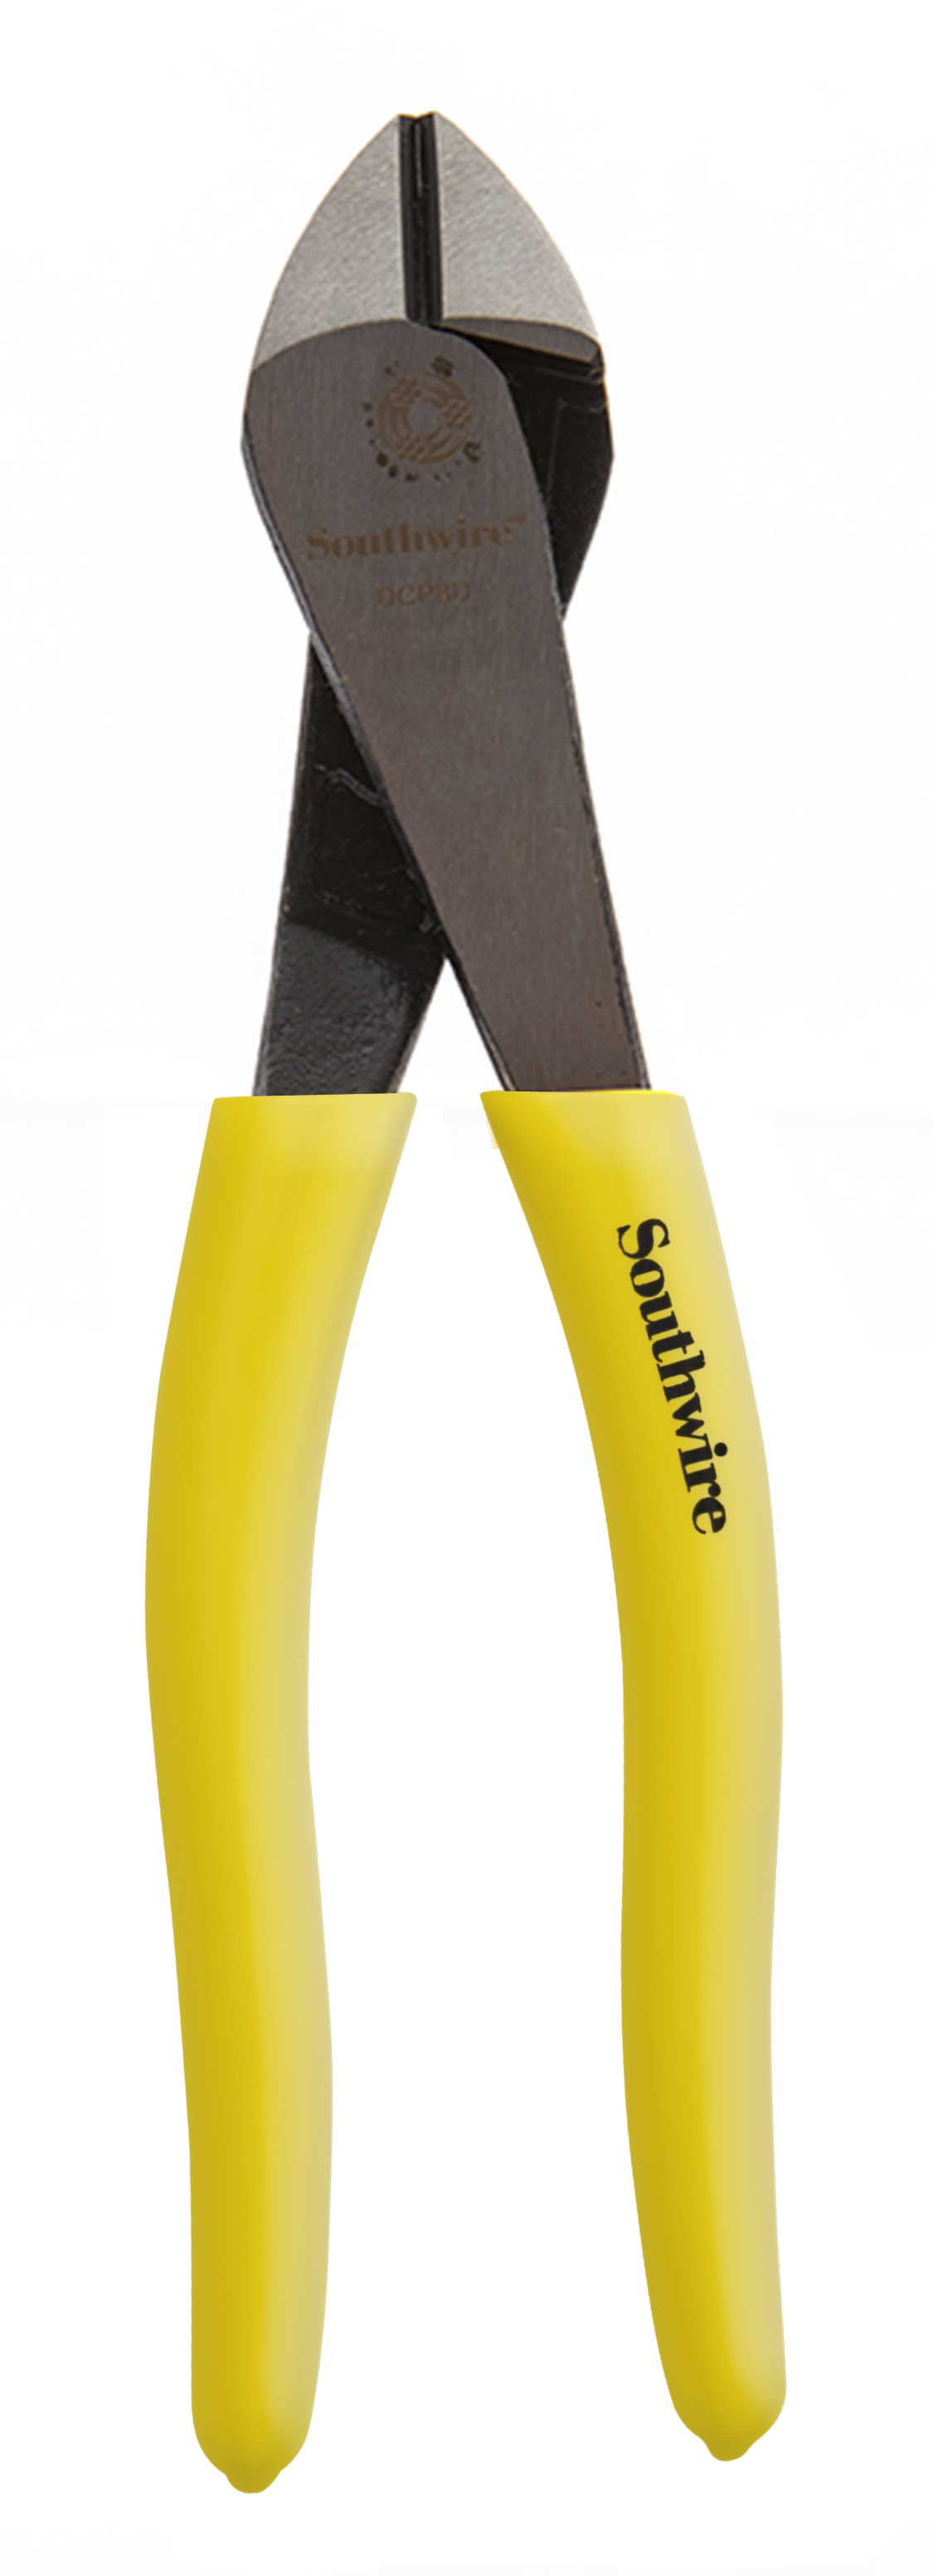 These 8" diagonal cutting pliers feature a comforatble dipped handle. With drop forged construction and a strong high leverage, hot-riveted pivot joing, these pliers offer smooth action, no handle wobble and excellent cutting power.